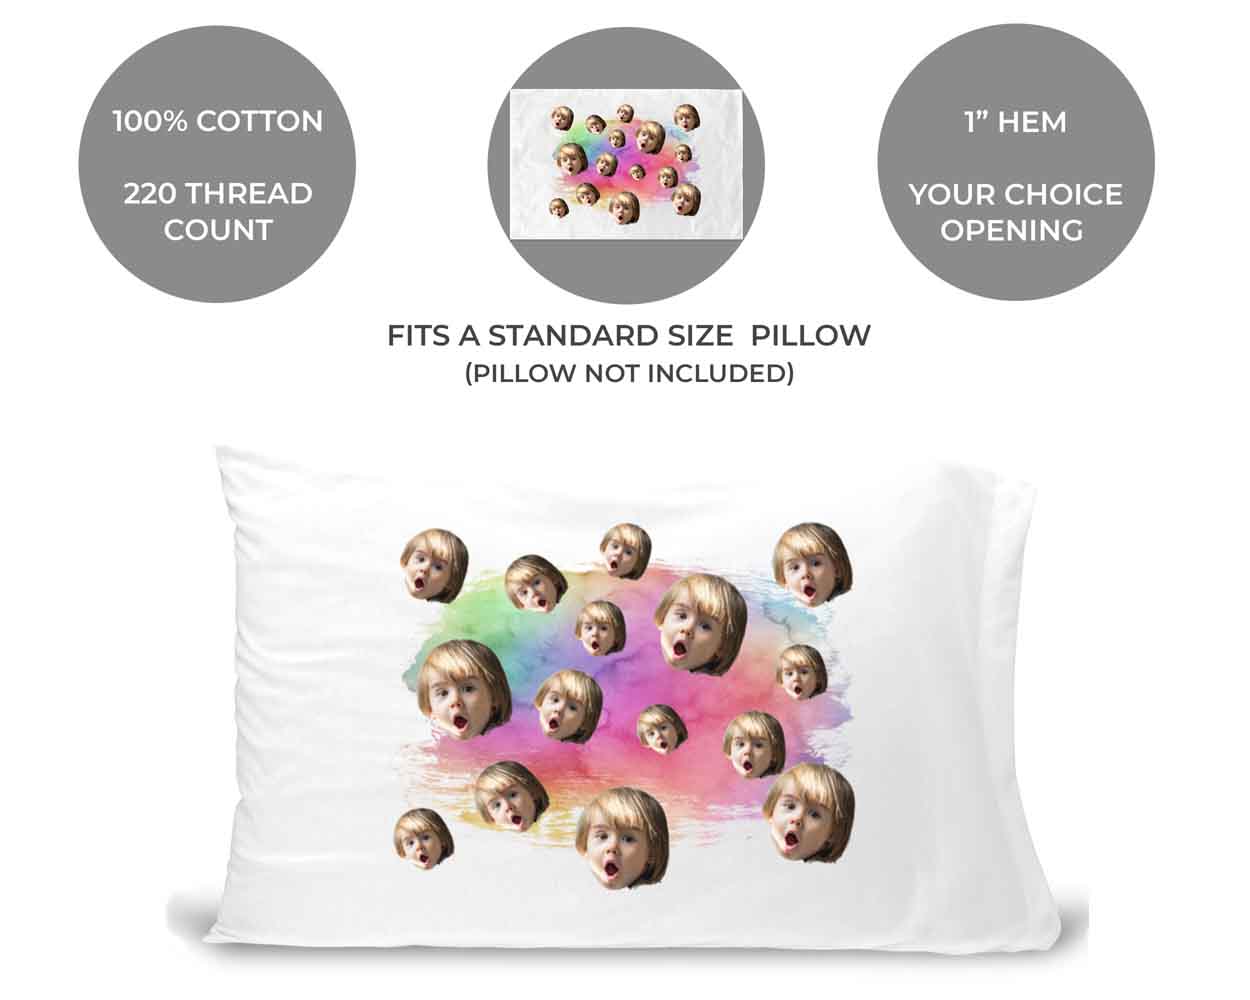 The pillowcases are 100% cotton standard white, 220 thread count, your choice of opening to the right or left, custom printed and personalized with your photo face cropped on rainbow wash design.